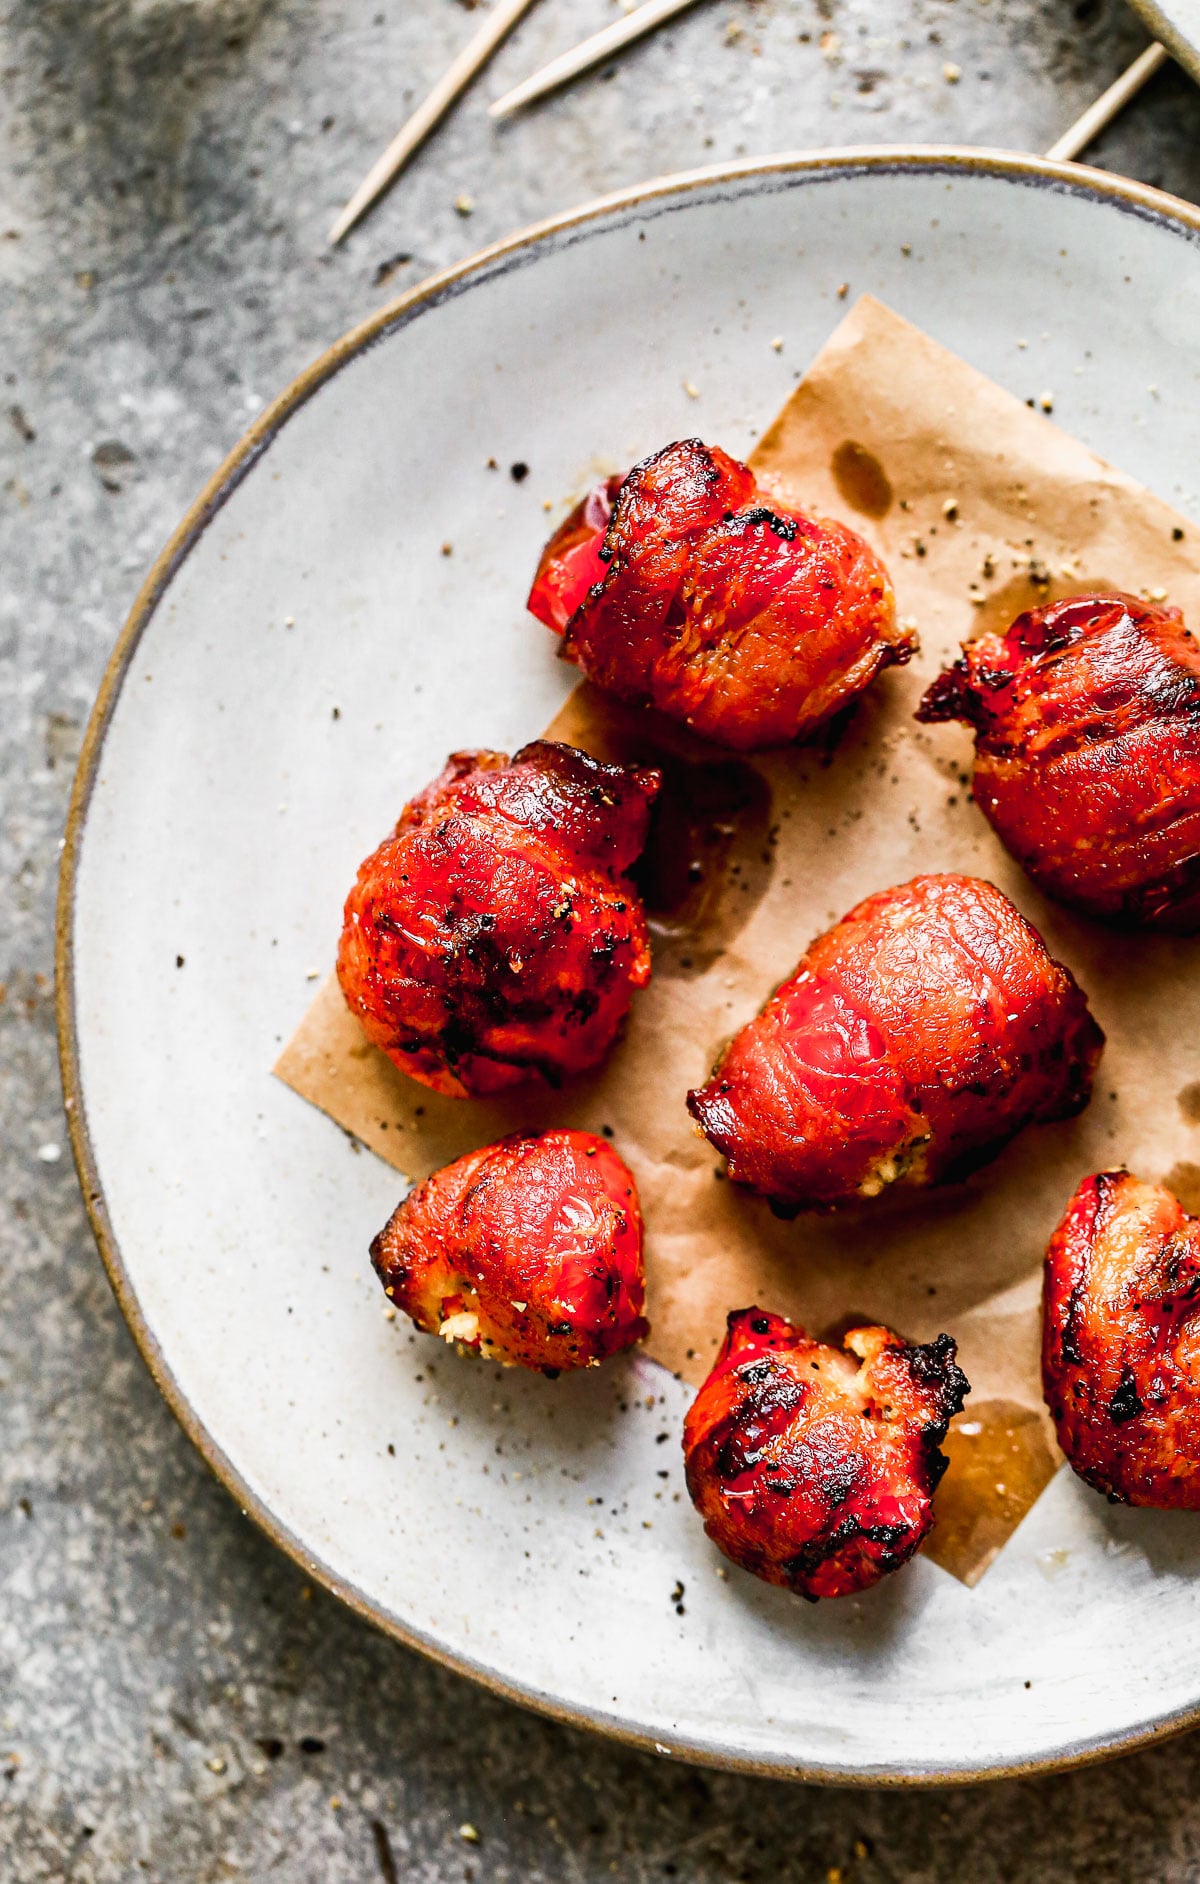 Bacon-Wrapped Stuffed Peppadews:These little bites of heaven are stuffed with our favorite herbed cheese, wrapped in salty bacon and popped into the air fryer until irresistibly crispy and creamy. The perfect happy hour treat! 